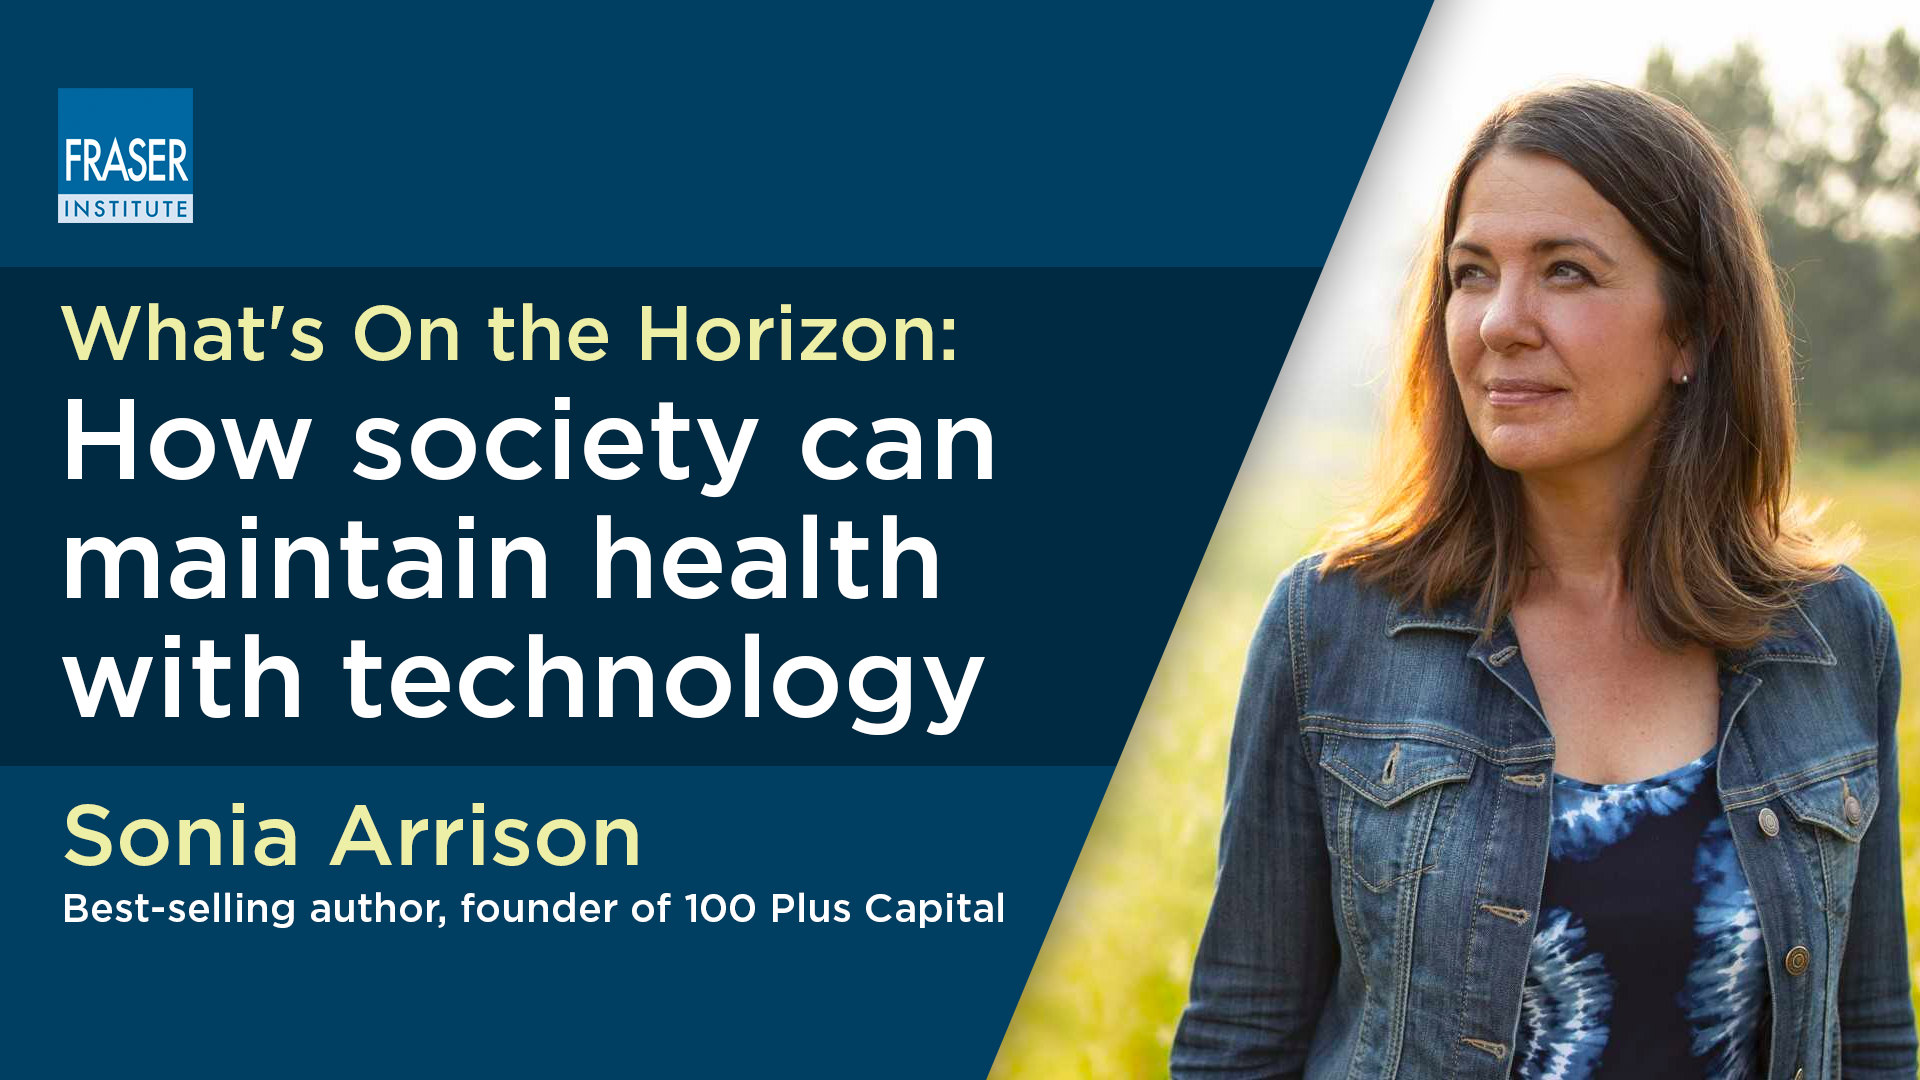 What's On the Horizon: how society can maintain health with technology